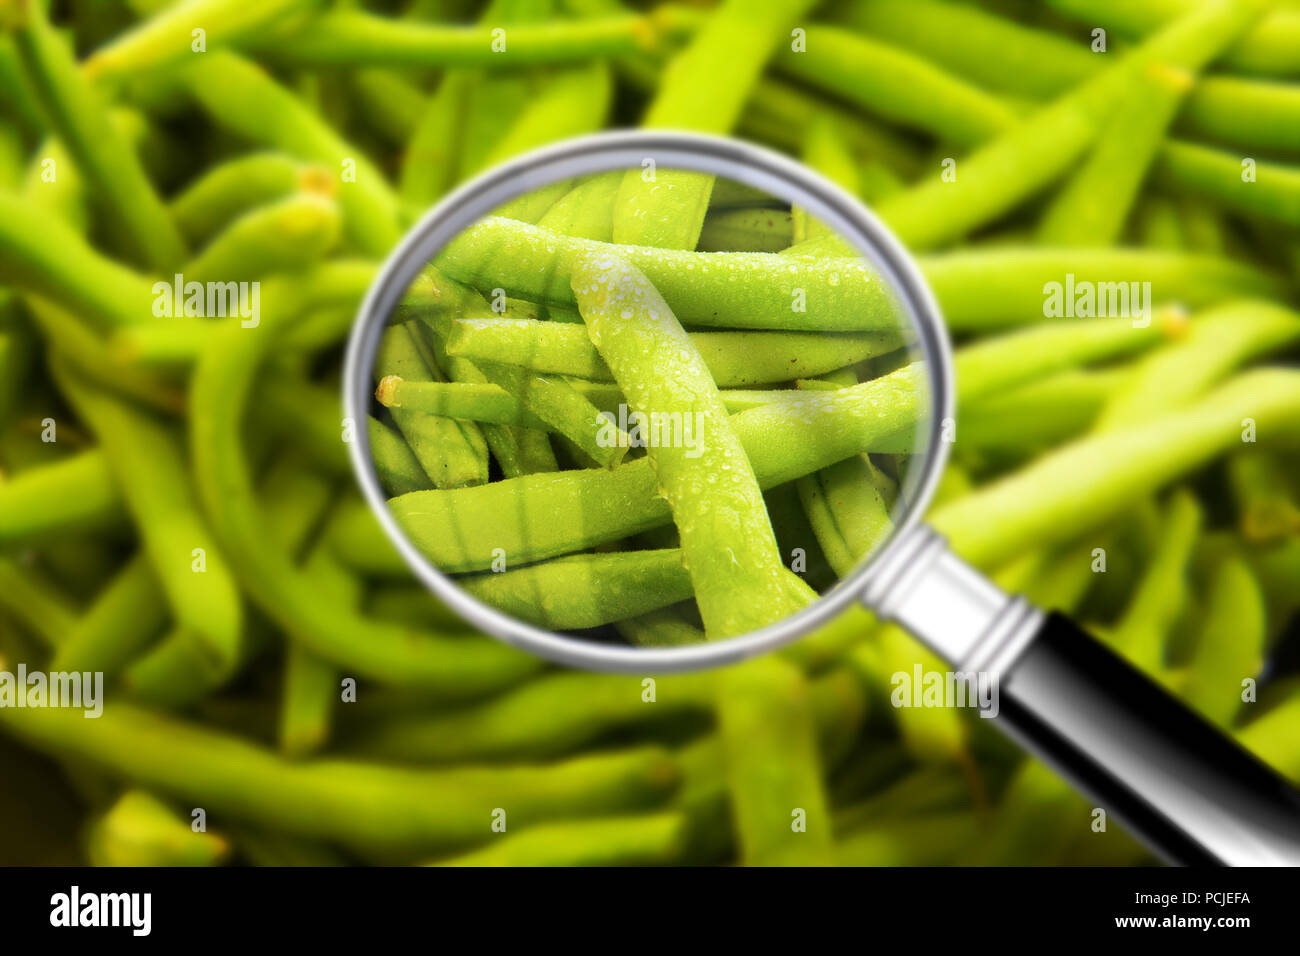 Quality control about freshness green beans - HACCP (Hazard Analyses and Critical Control Points) concept image with beans seen through a magnifying g Stock Photo